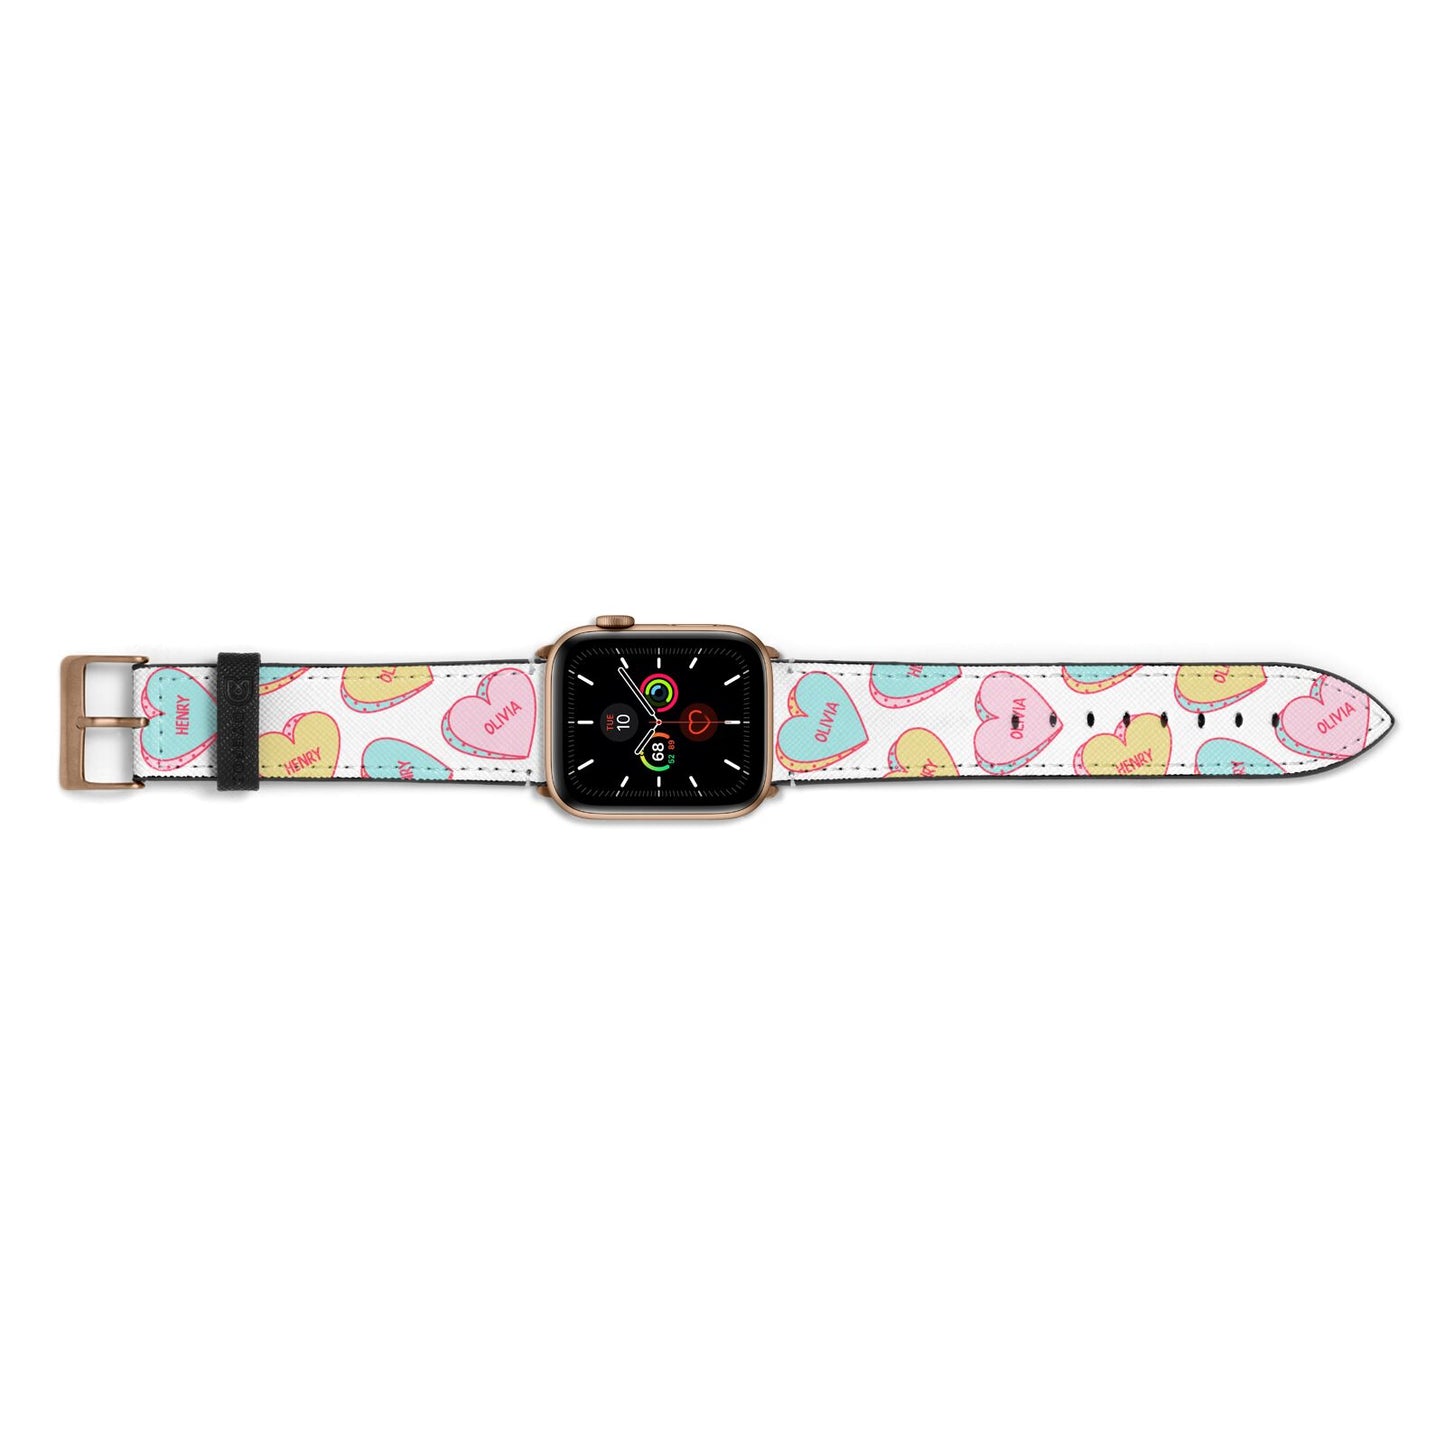 Personalised Heart Sweets Apple Watch Strap Landscape Image Gold Hardware